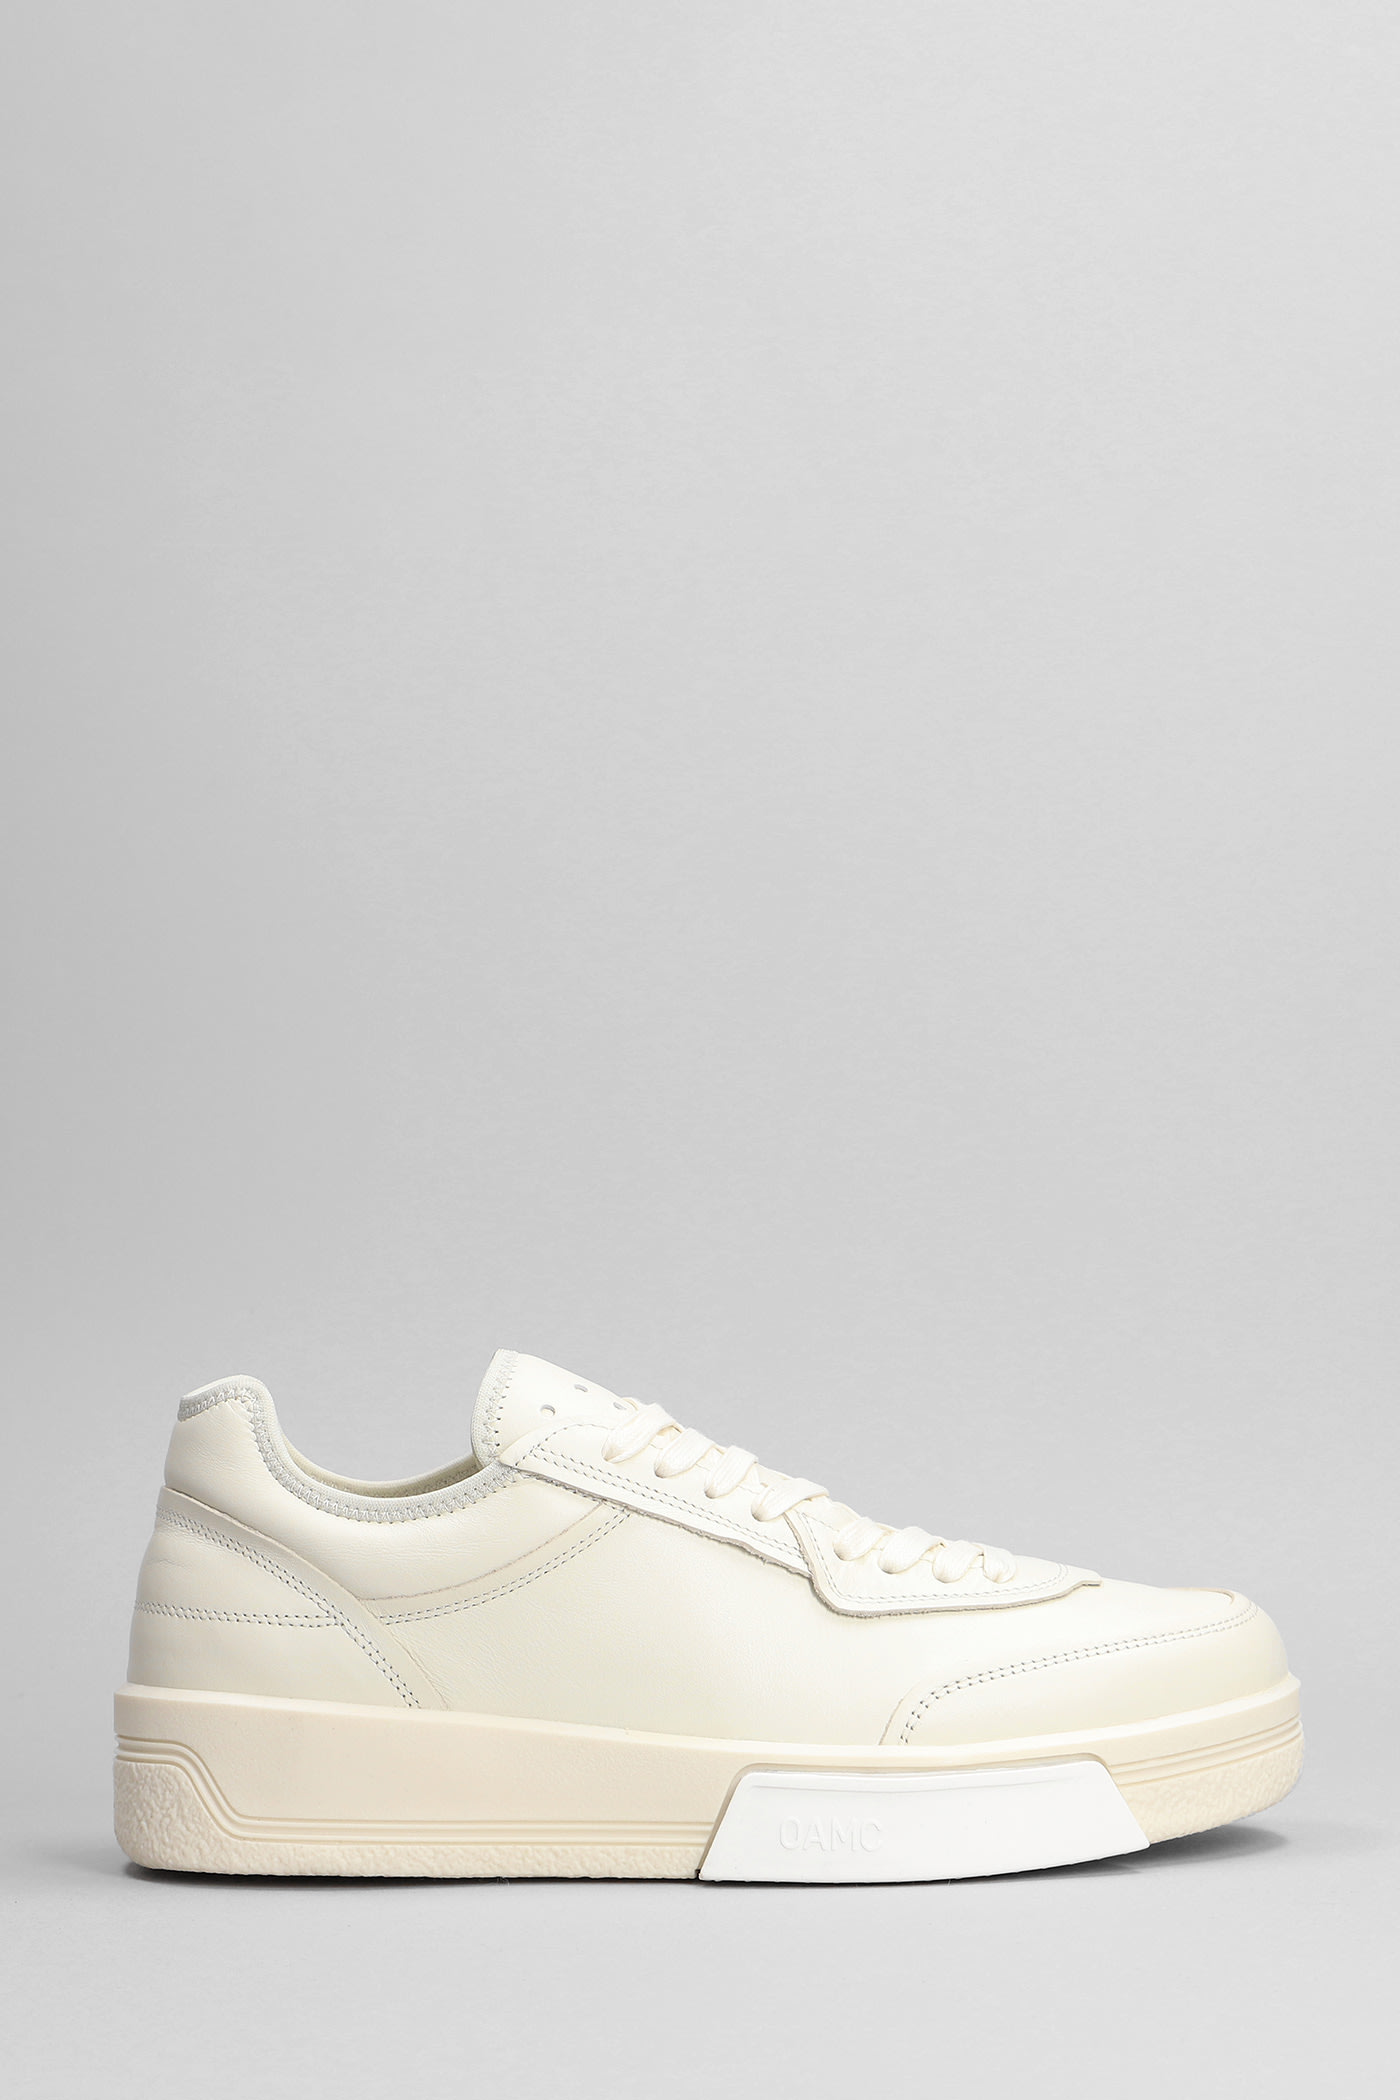 Shop Oamc Cosmos Sneakers In White Leather